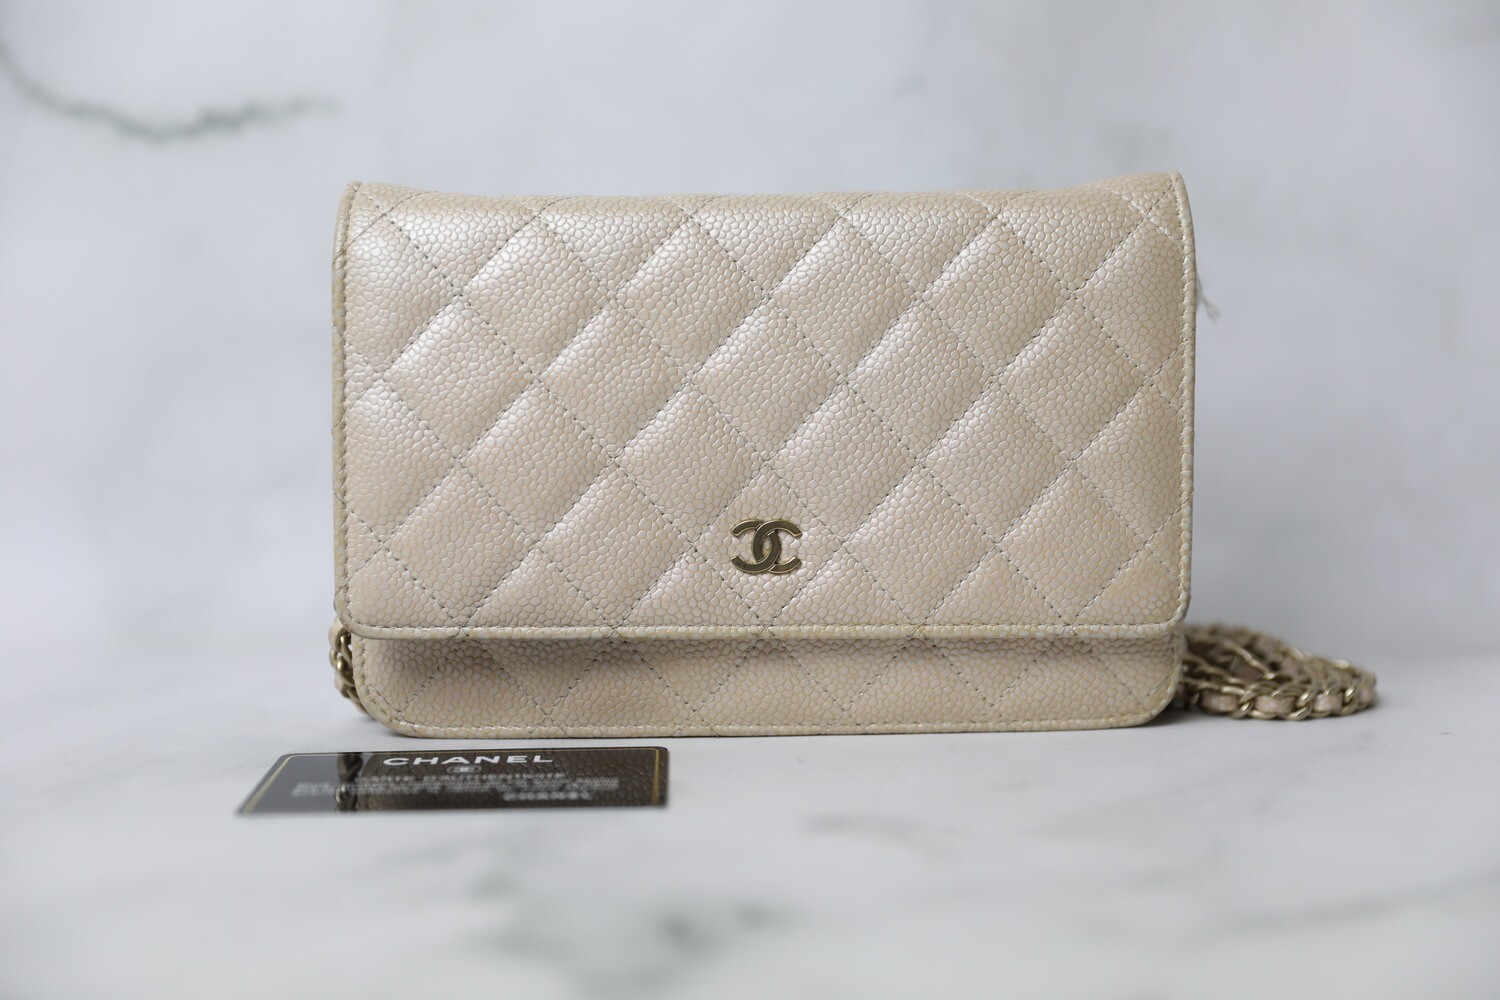 Chanel Seasonal Flap with Heart Chain, Black Leather with Gold Hardware,  Preowned in Dustbag WA001